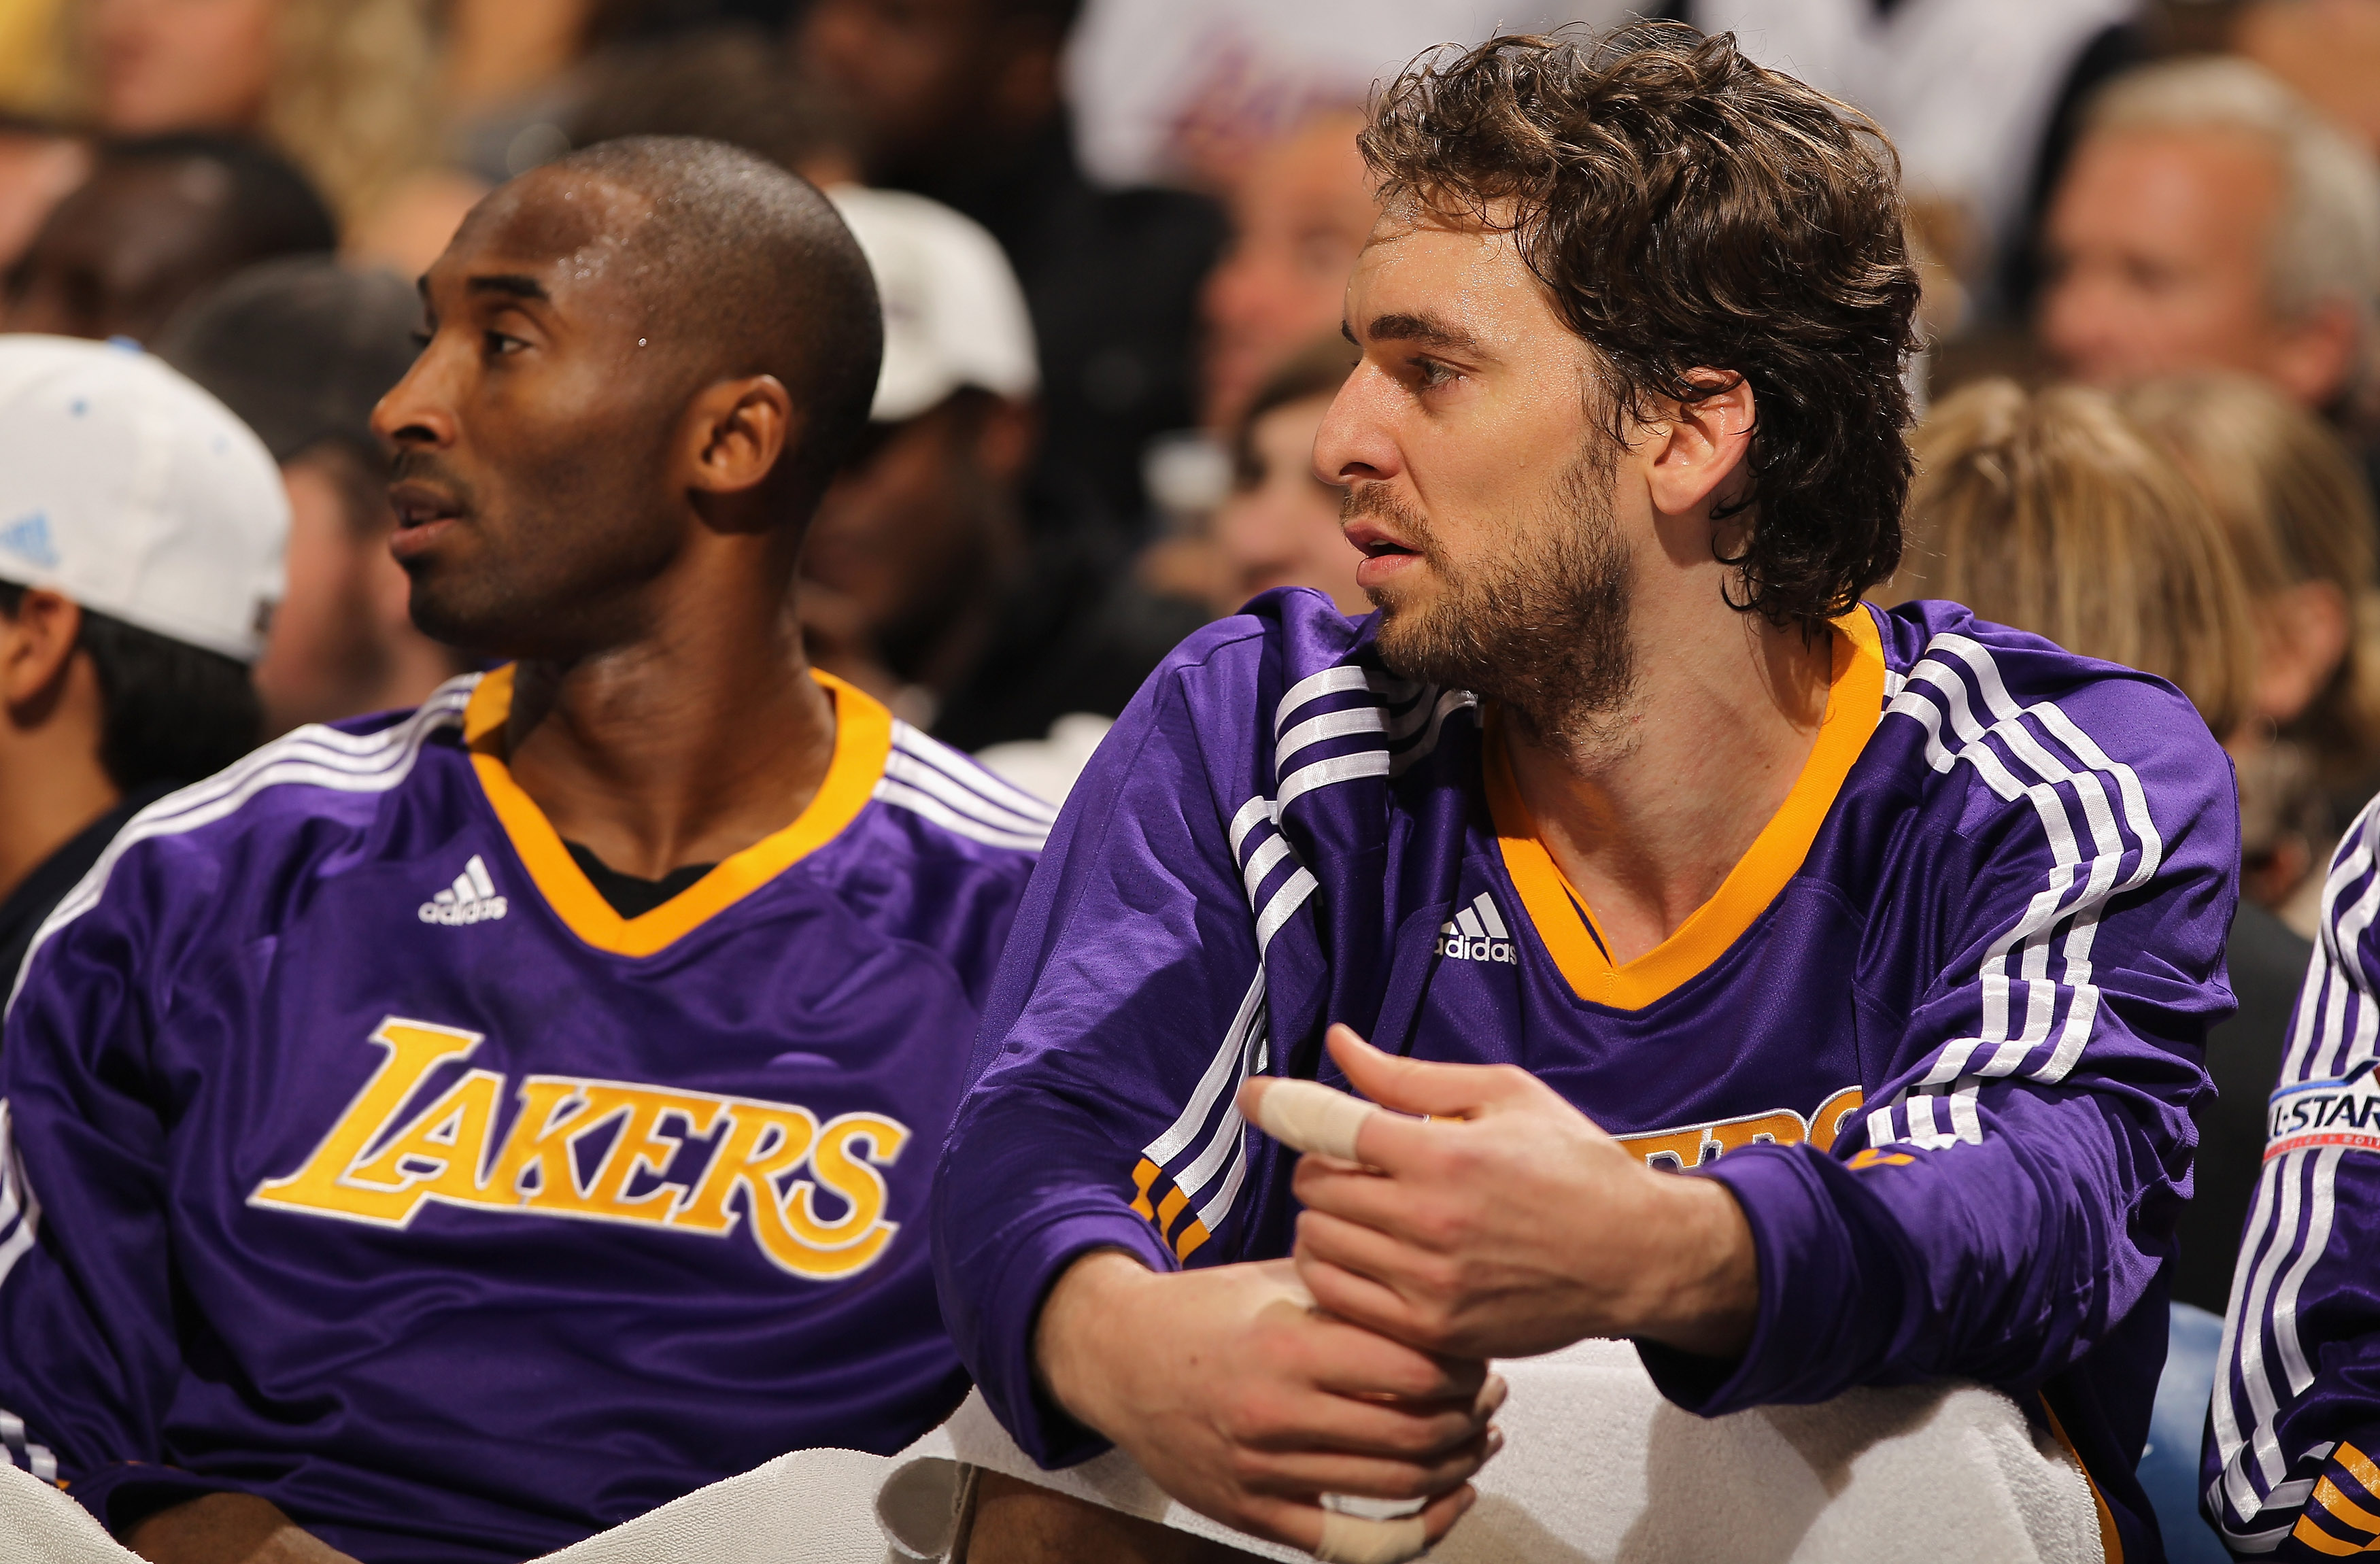 DENVER - NOVEMBER 11:  Kobe Bryant #24 and Pau Gasol #16 of the Los Angeles Lakers look on from the bench against the Denver Nuggets at the Pepsi Center on November 11, 2010 in Denver, Colorado. The Nuggets defeated the Lakers 118-112.  NOTE TO USER: User